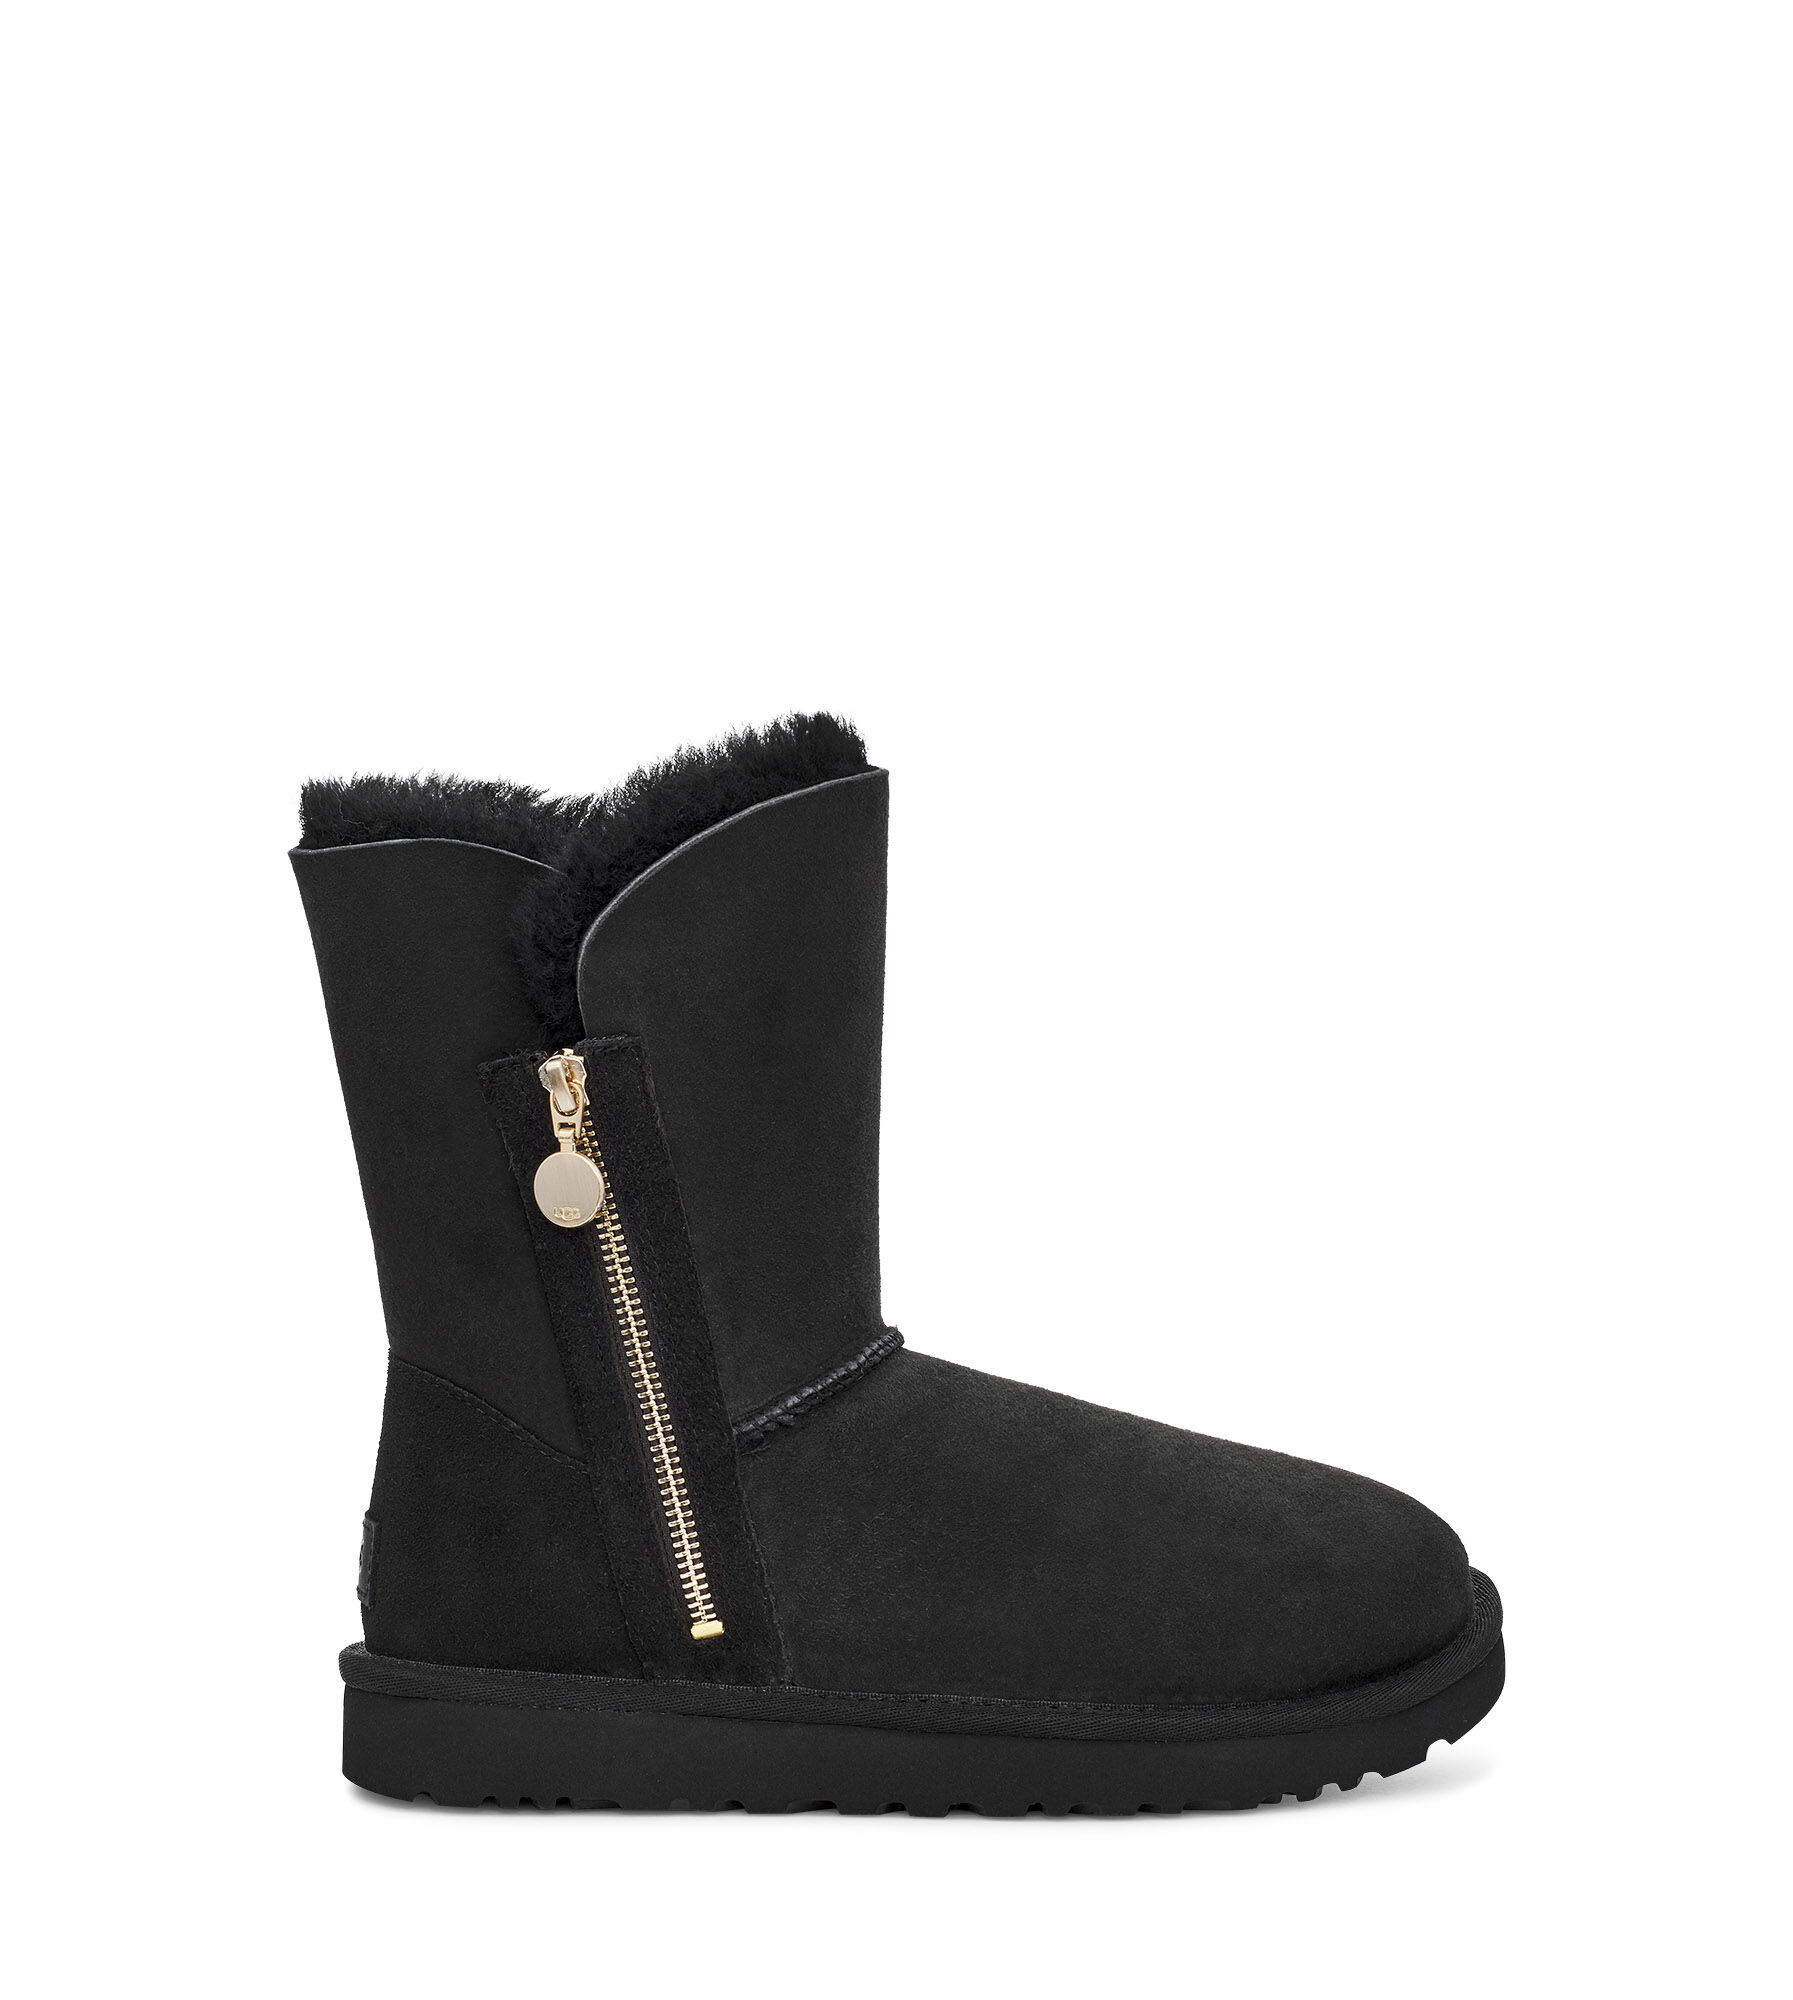 uggs with zipper on side